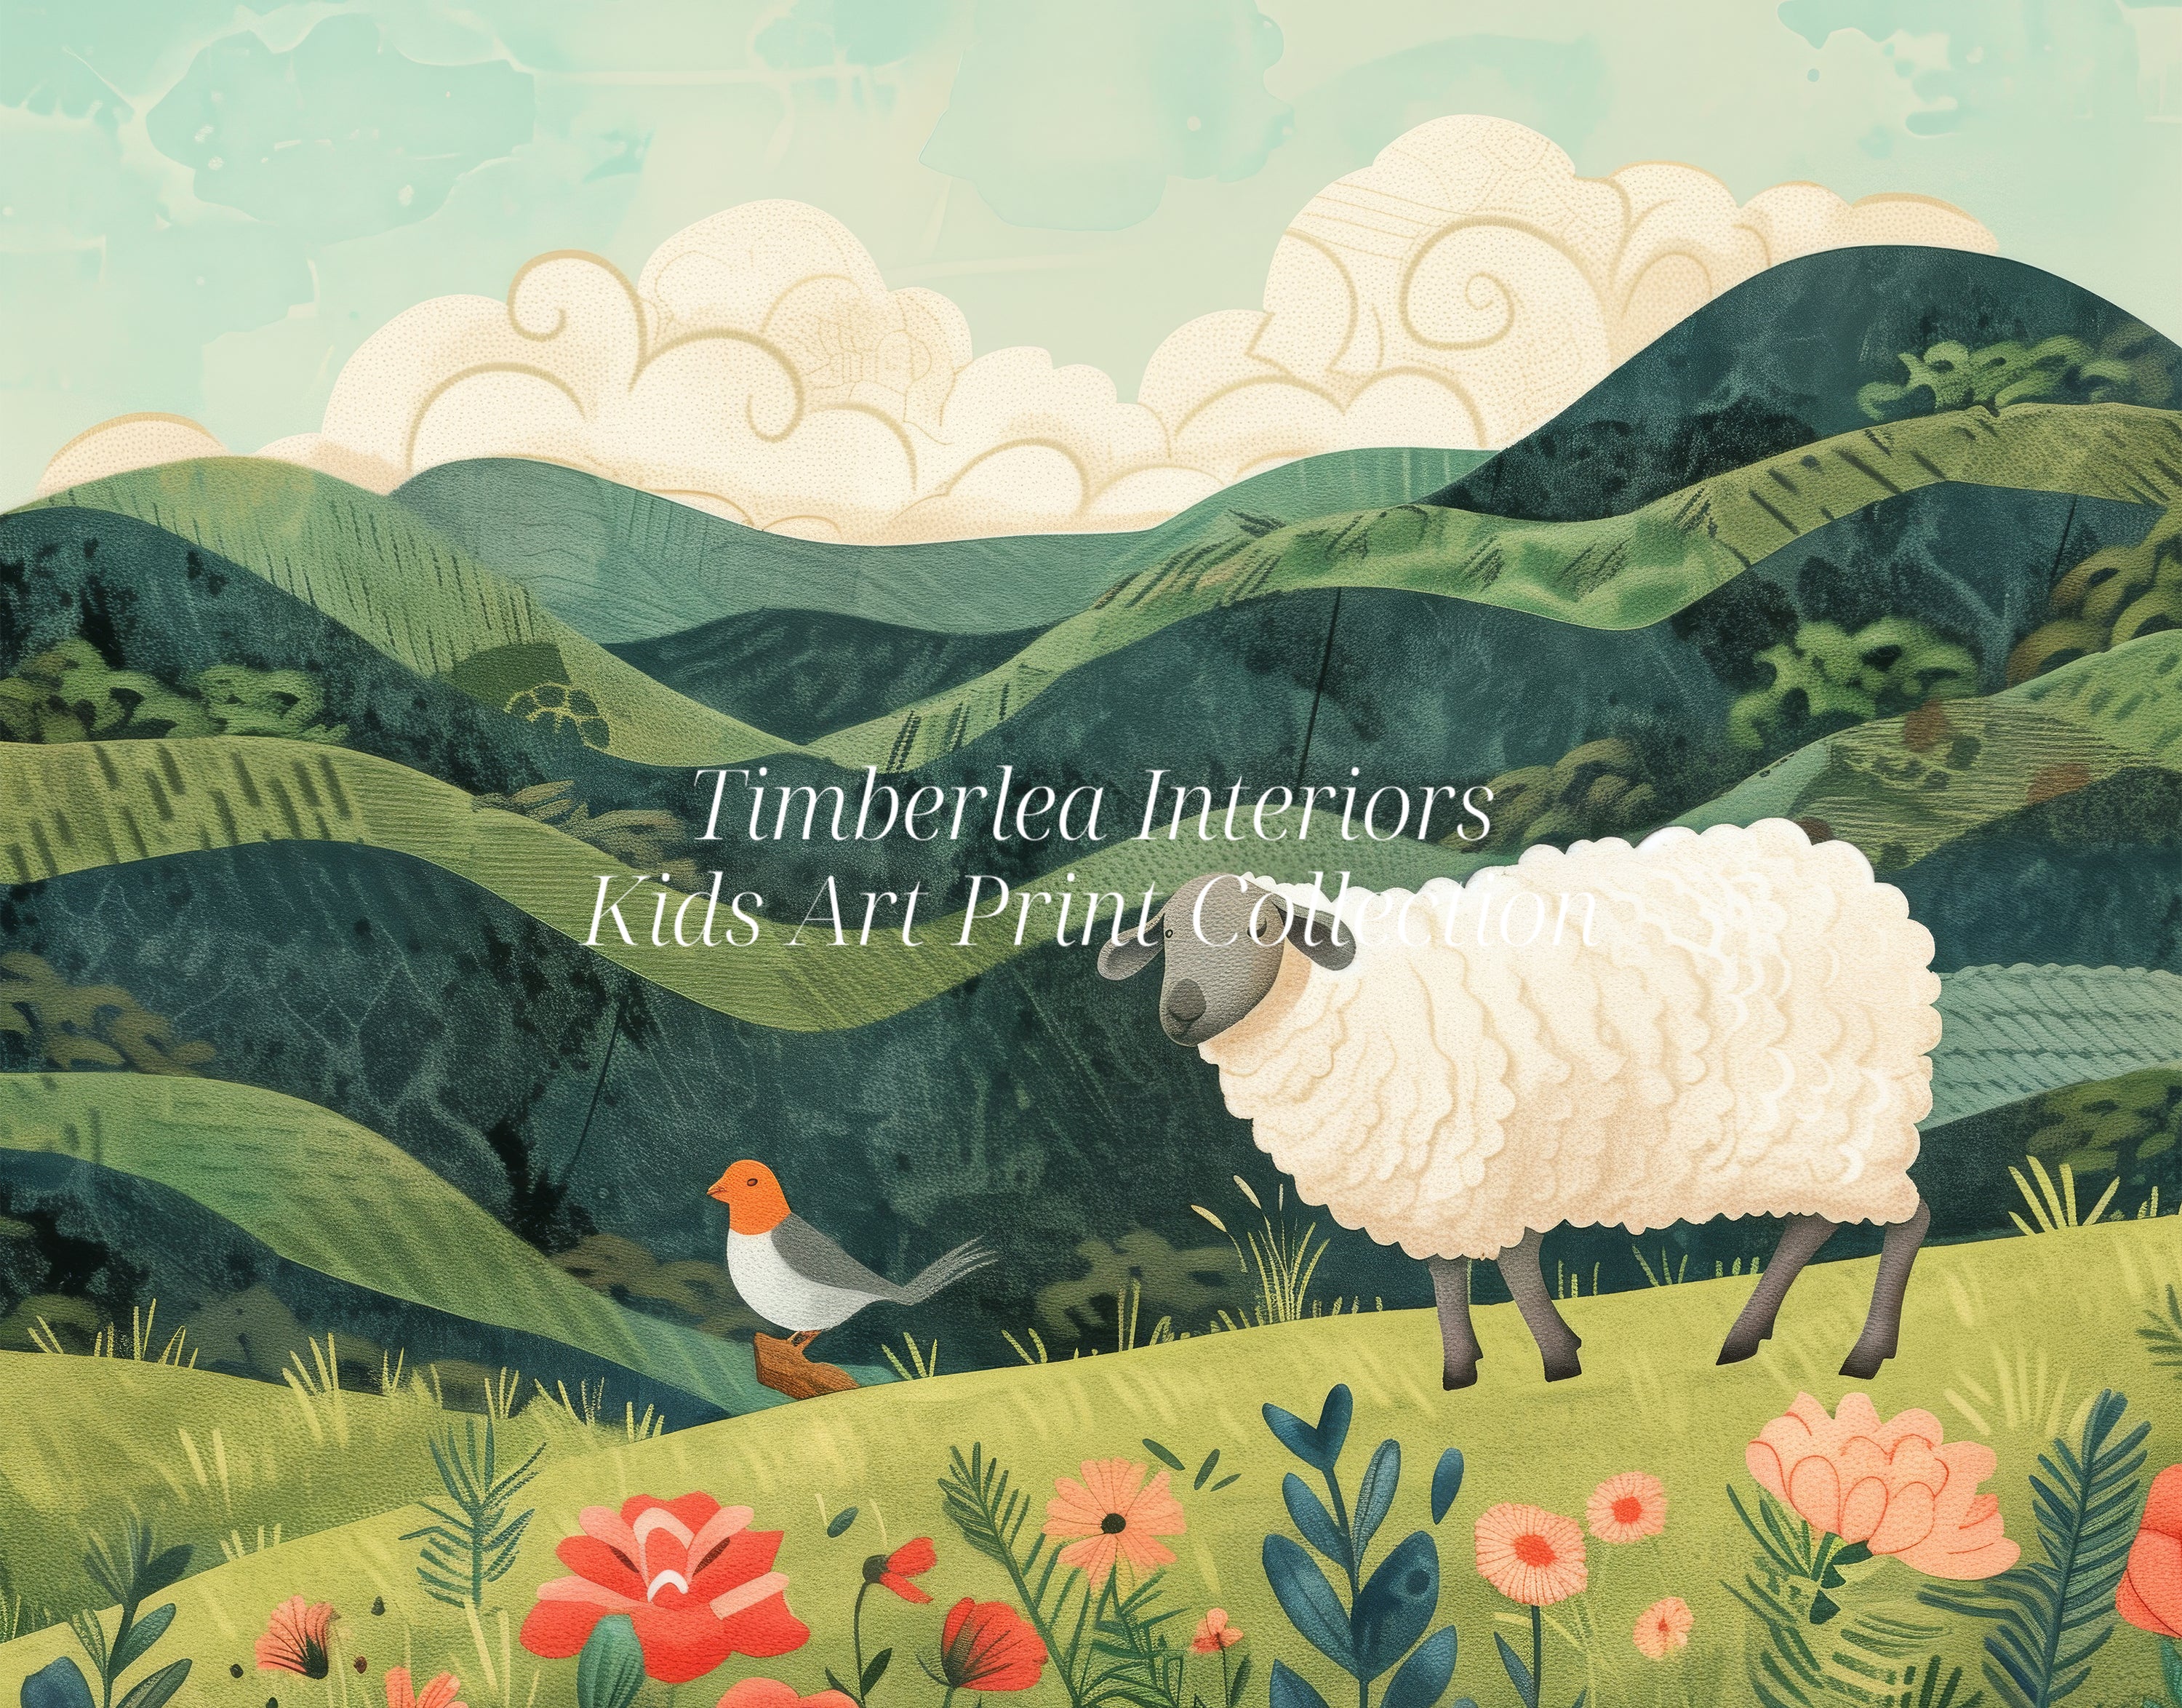 Close-up view of an enchanting art print featuring a serene landscape with rolling green hills, a fluffy sheep, and a cheerful bird amidst vibrant flowers.